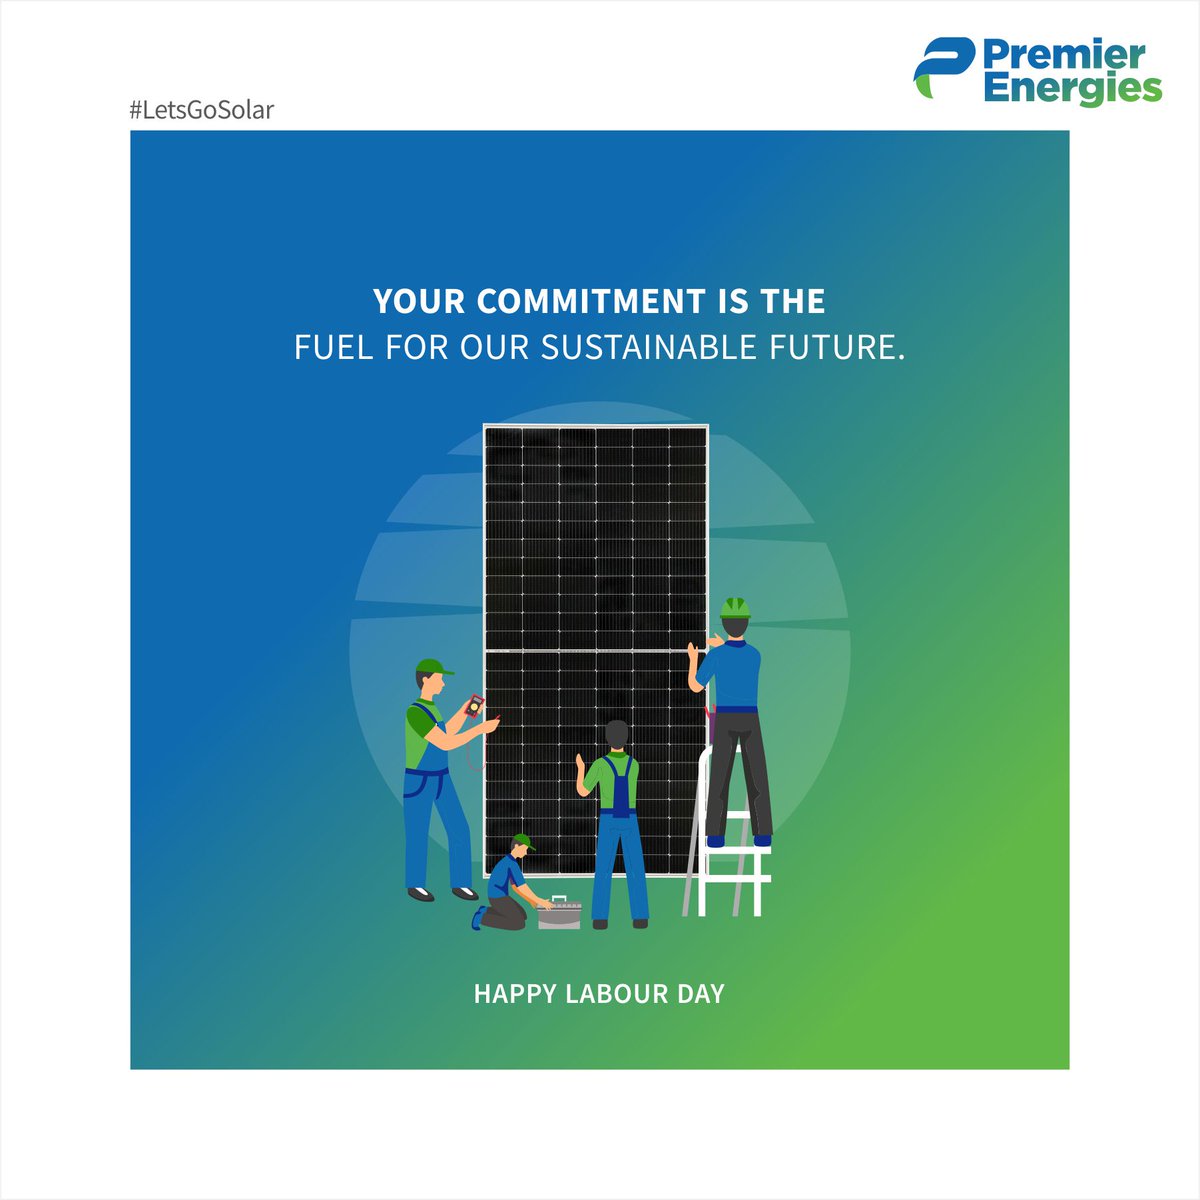 Here’s celebrating the hard work and dedication of every individual who contributes towards our collective dream of a brighter, more sustainable future! Thank you for your hard work.

#SolarPower #LaborDay #HappyLaborDay #1stMay #PremierEnergies #SolarModules  #LetsGoSolar